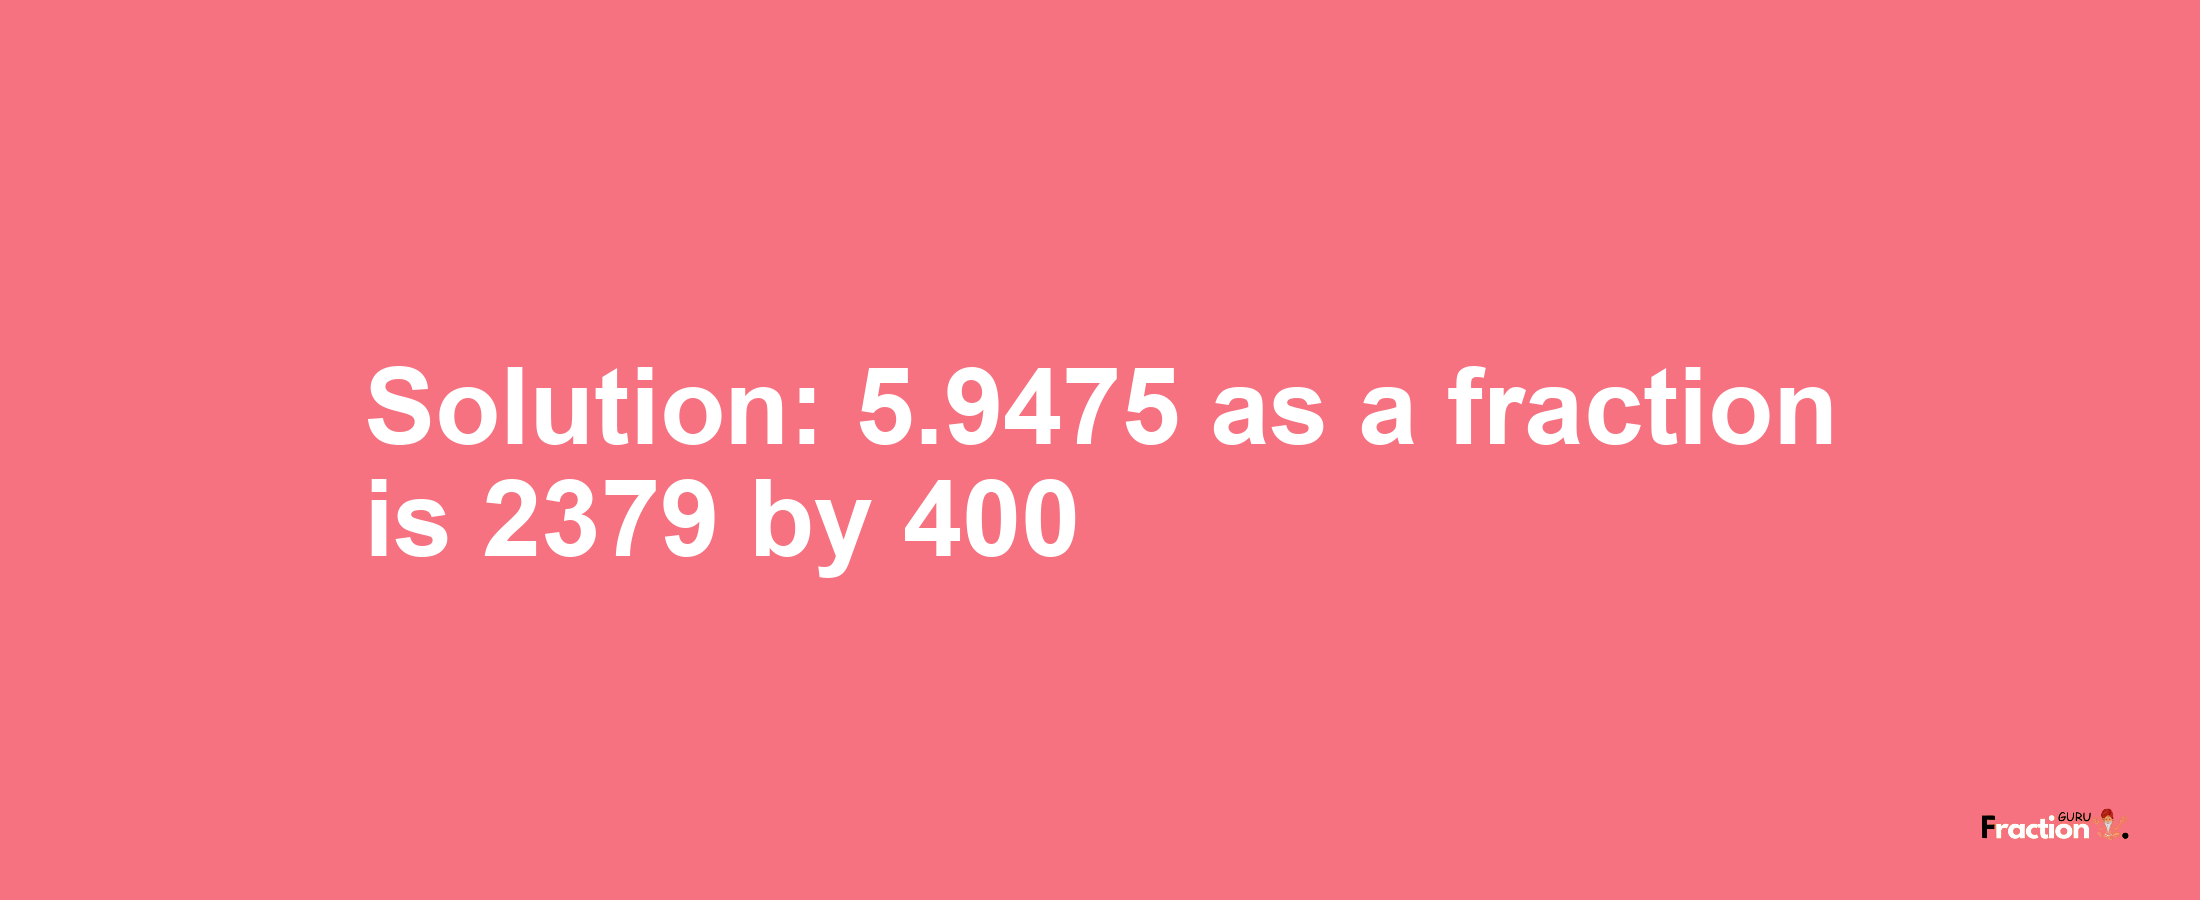 Solution:5.9475 as a fraction is 2379/400